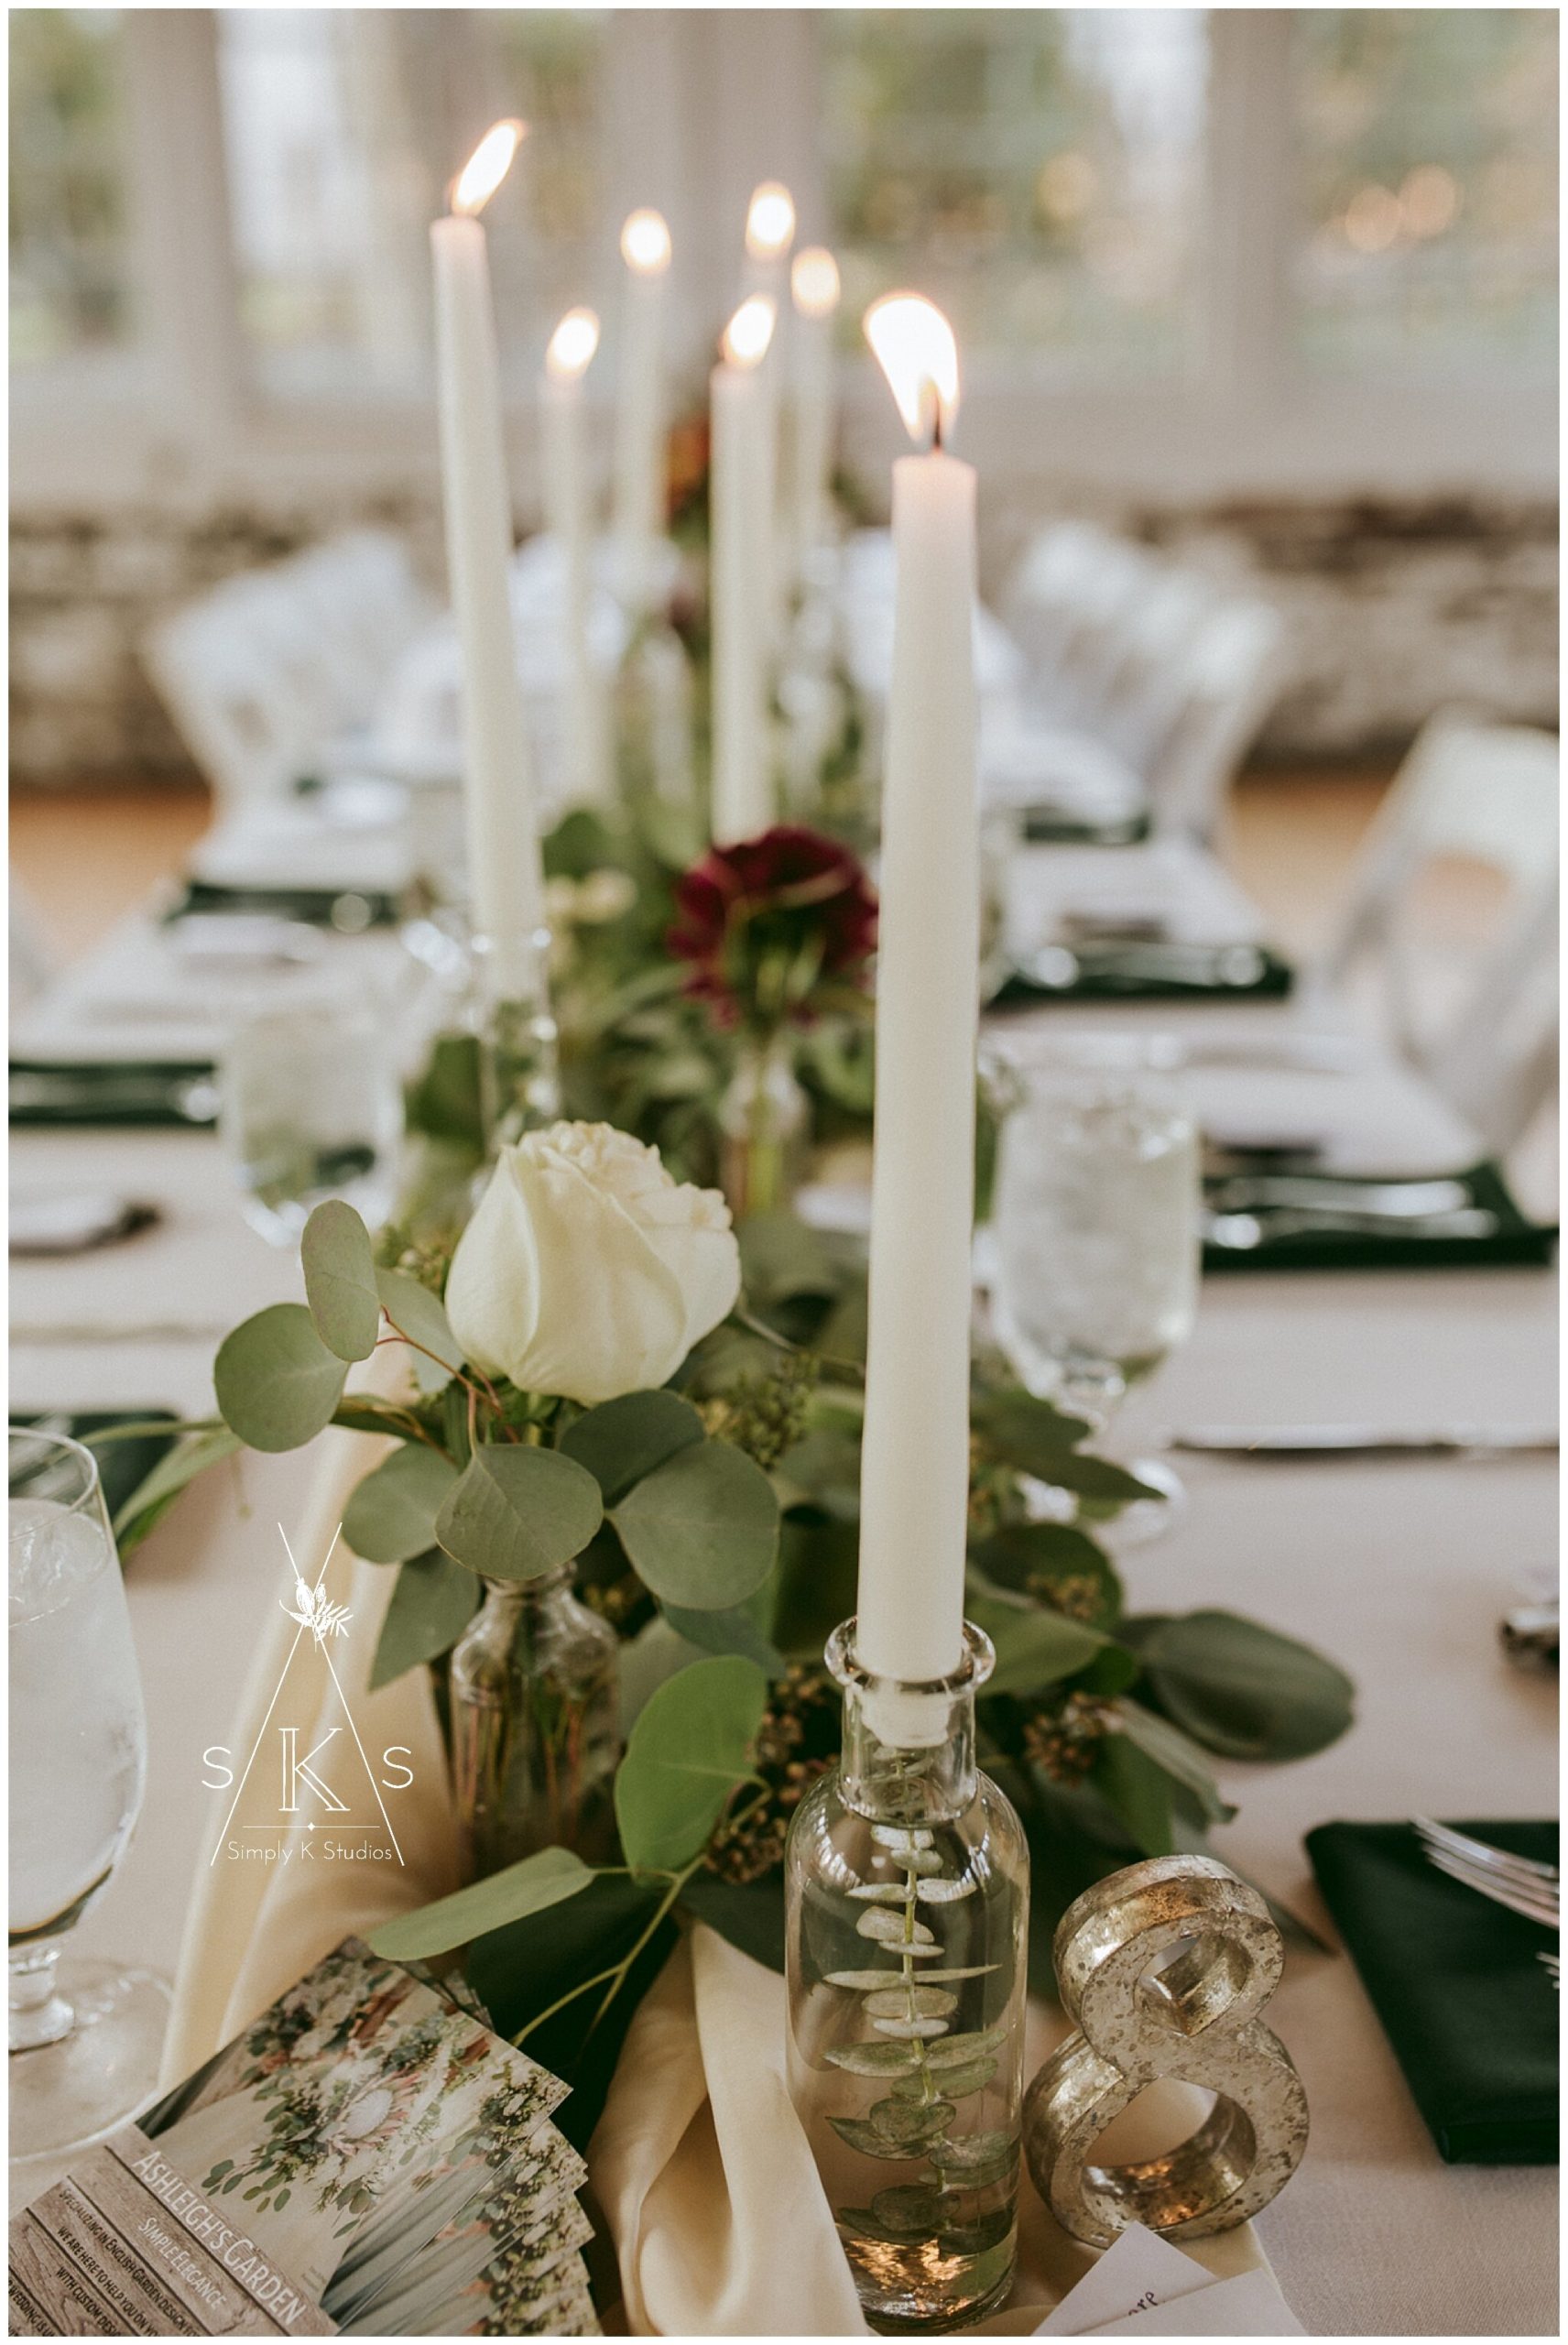  white candlesticks on a table with flowers 